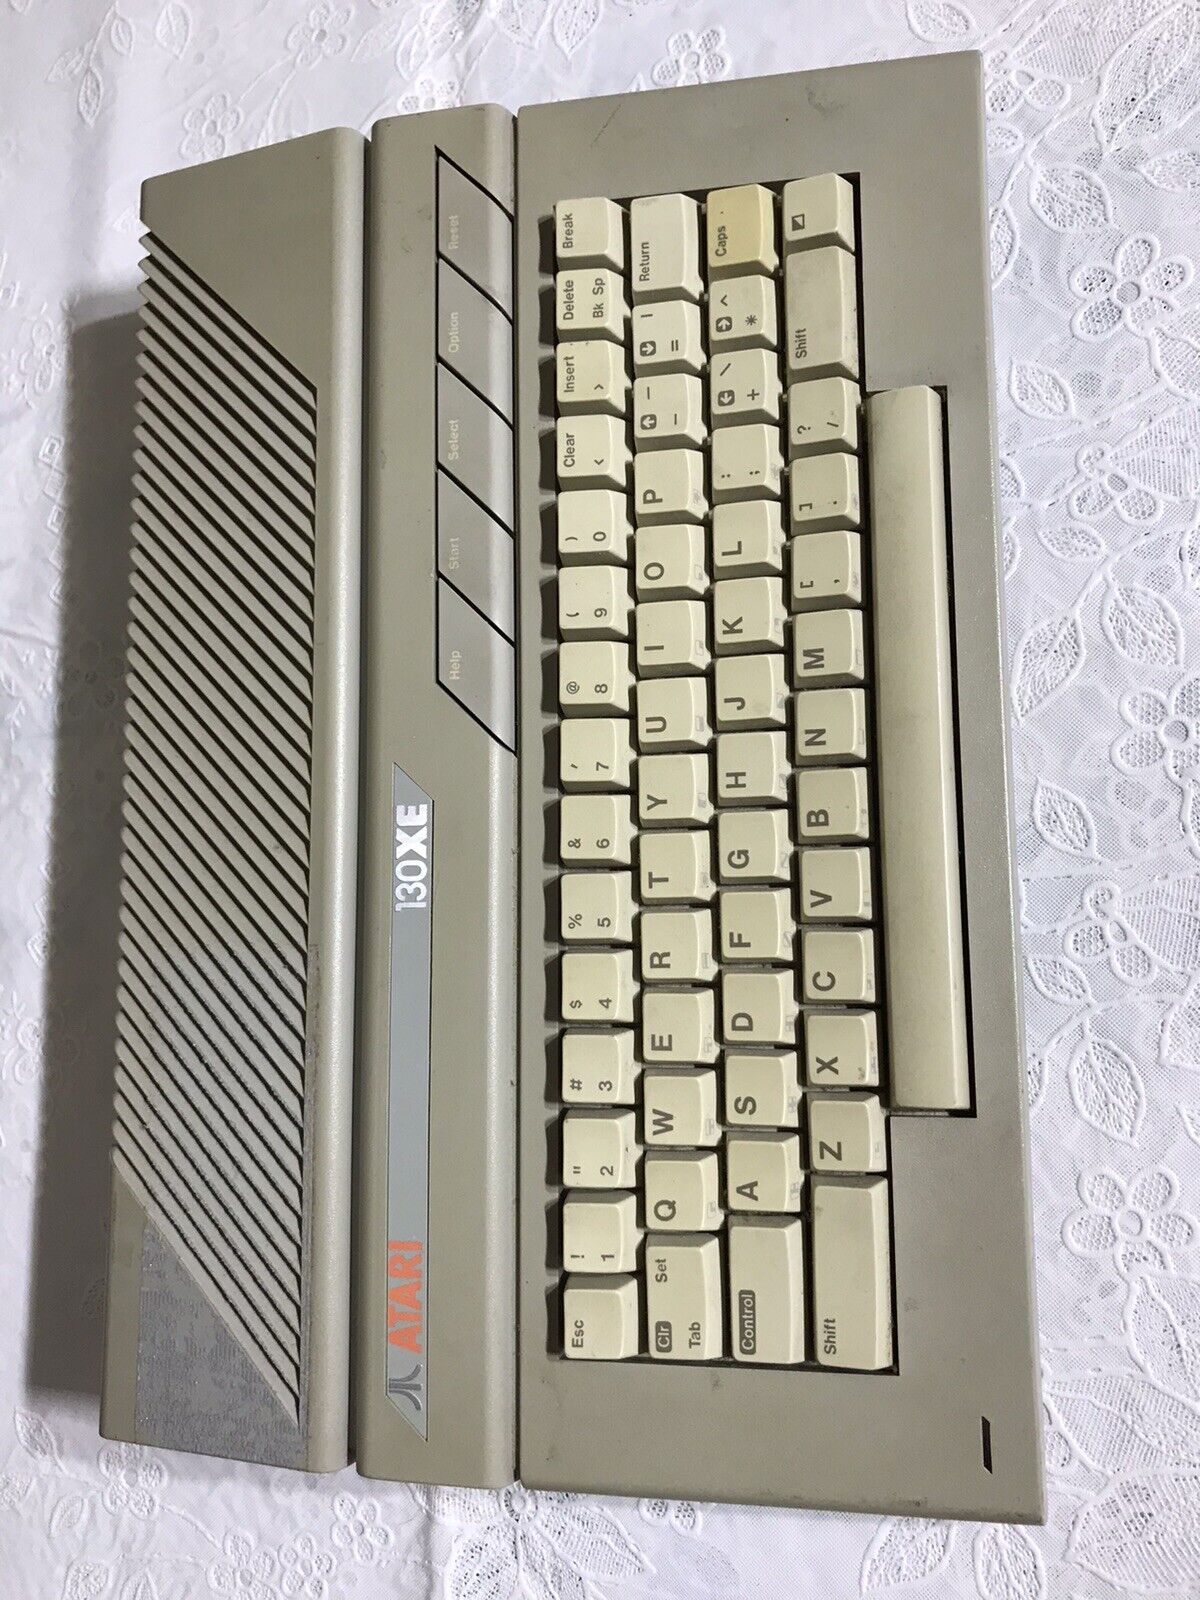 ATARI 130XE, Vintage Computer Only, Untested